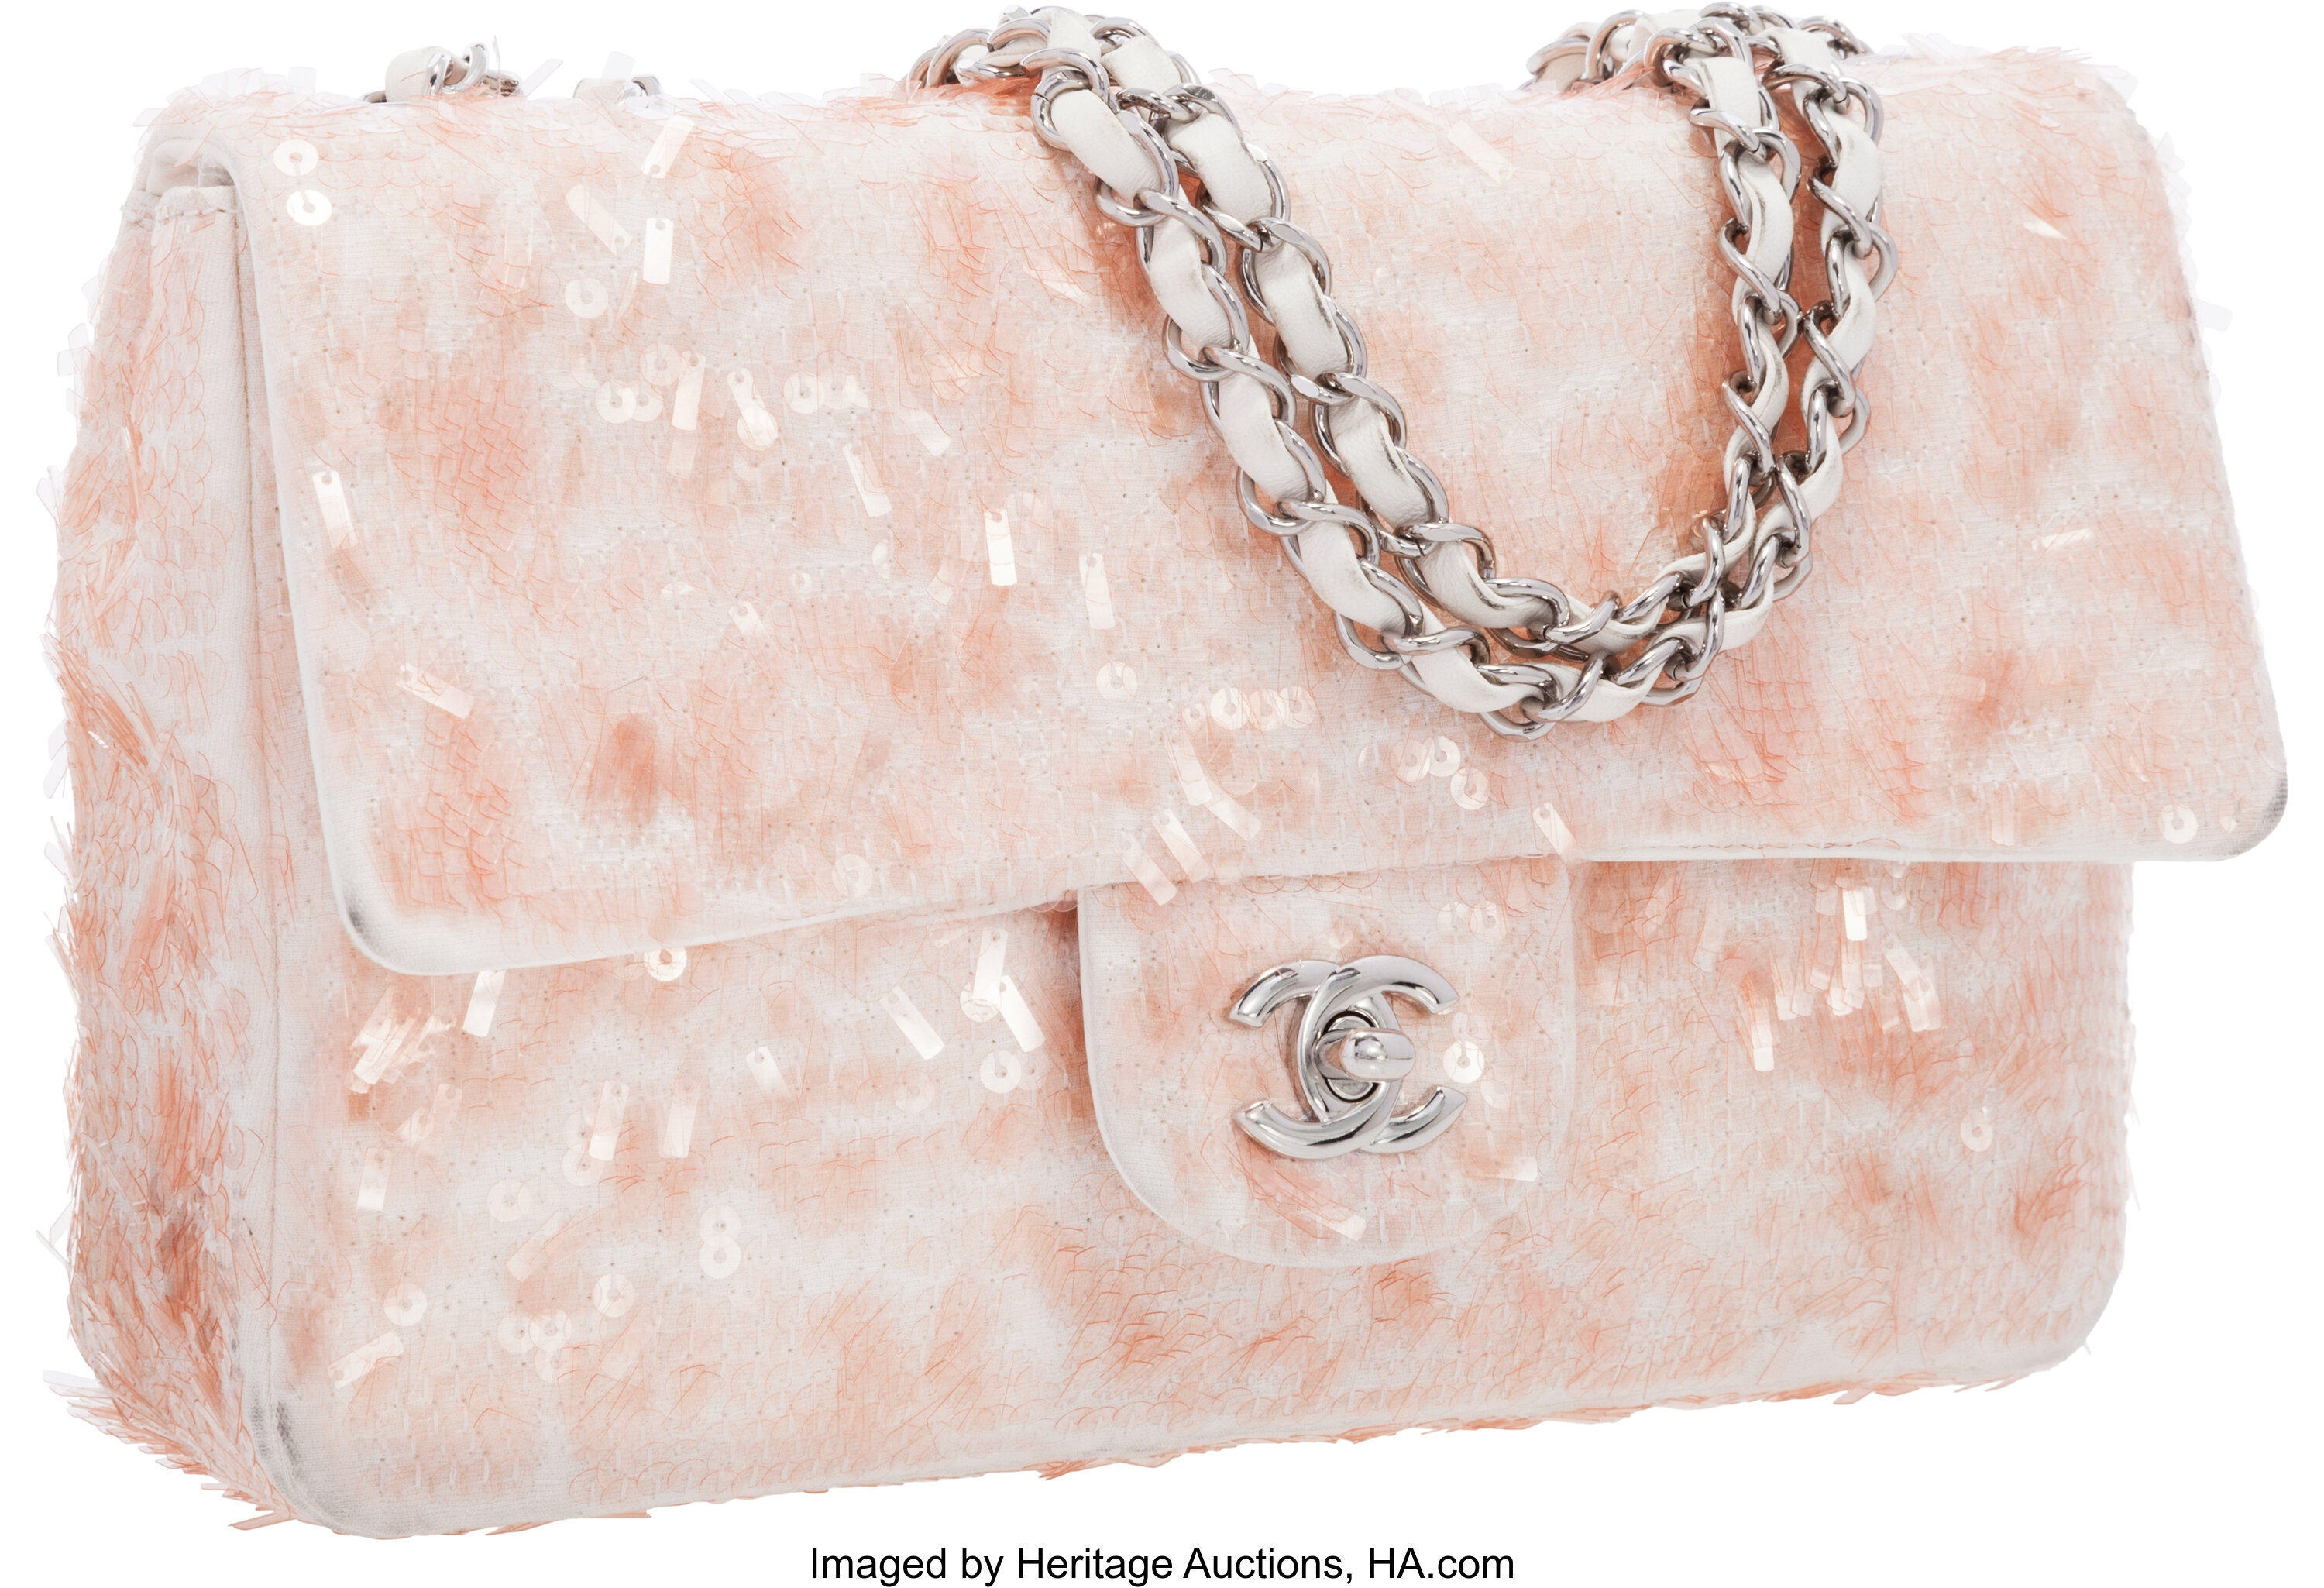 Chanel Pink Sequin Flap Bag with Silver Hardware. Excellent